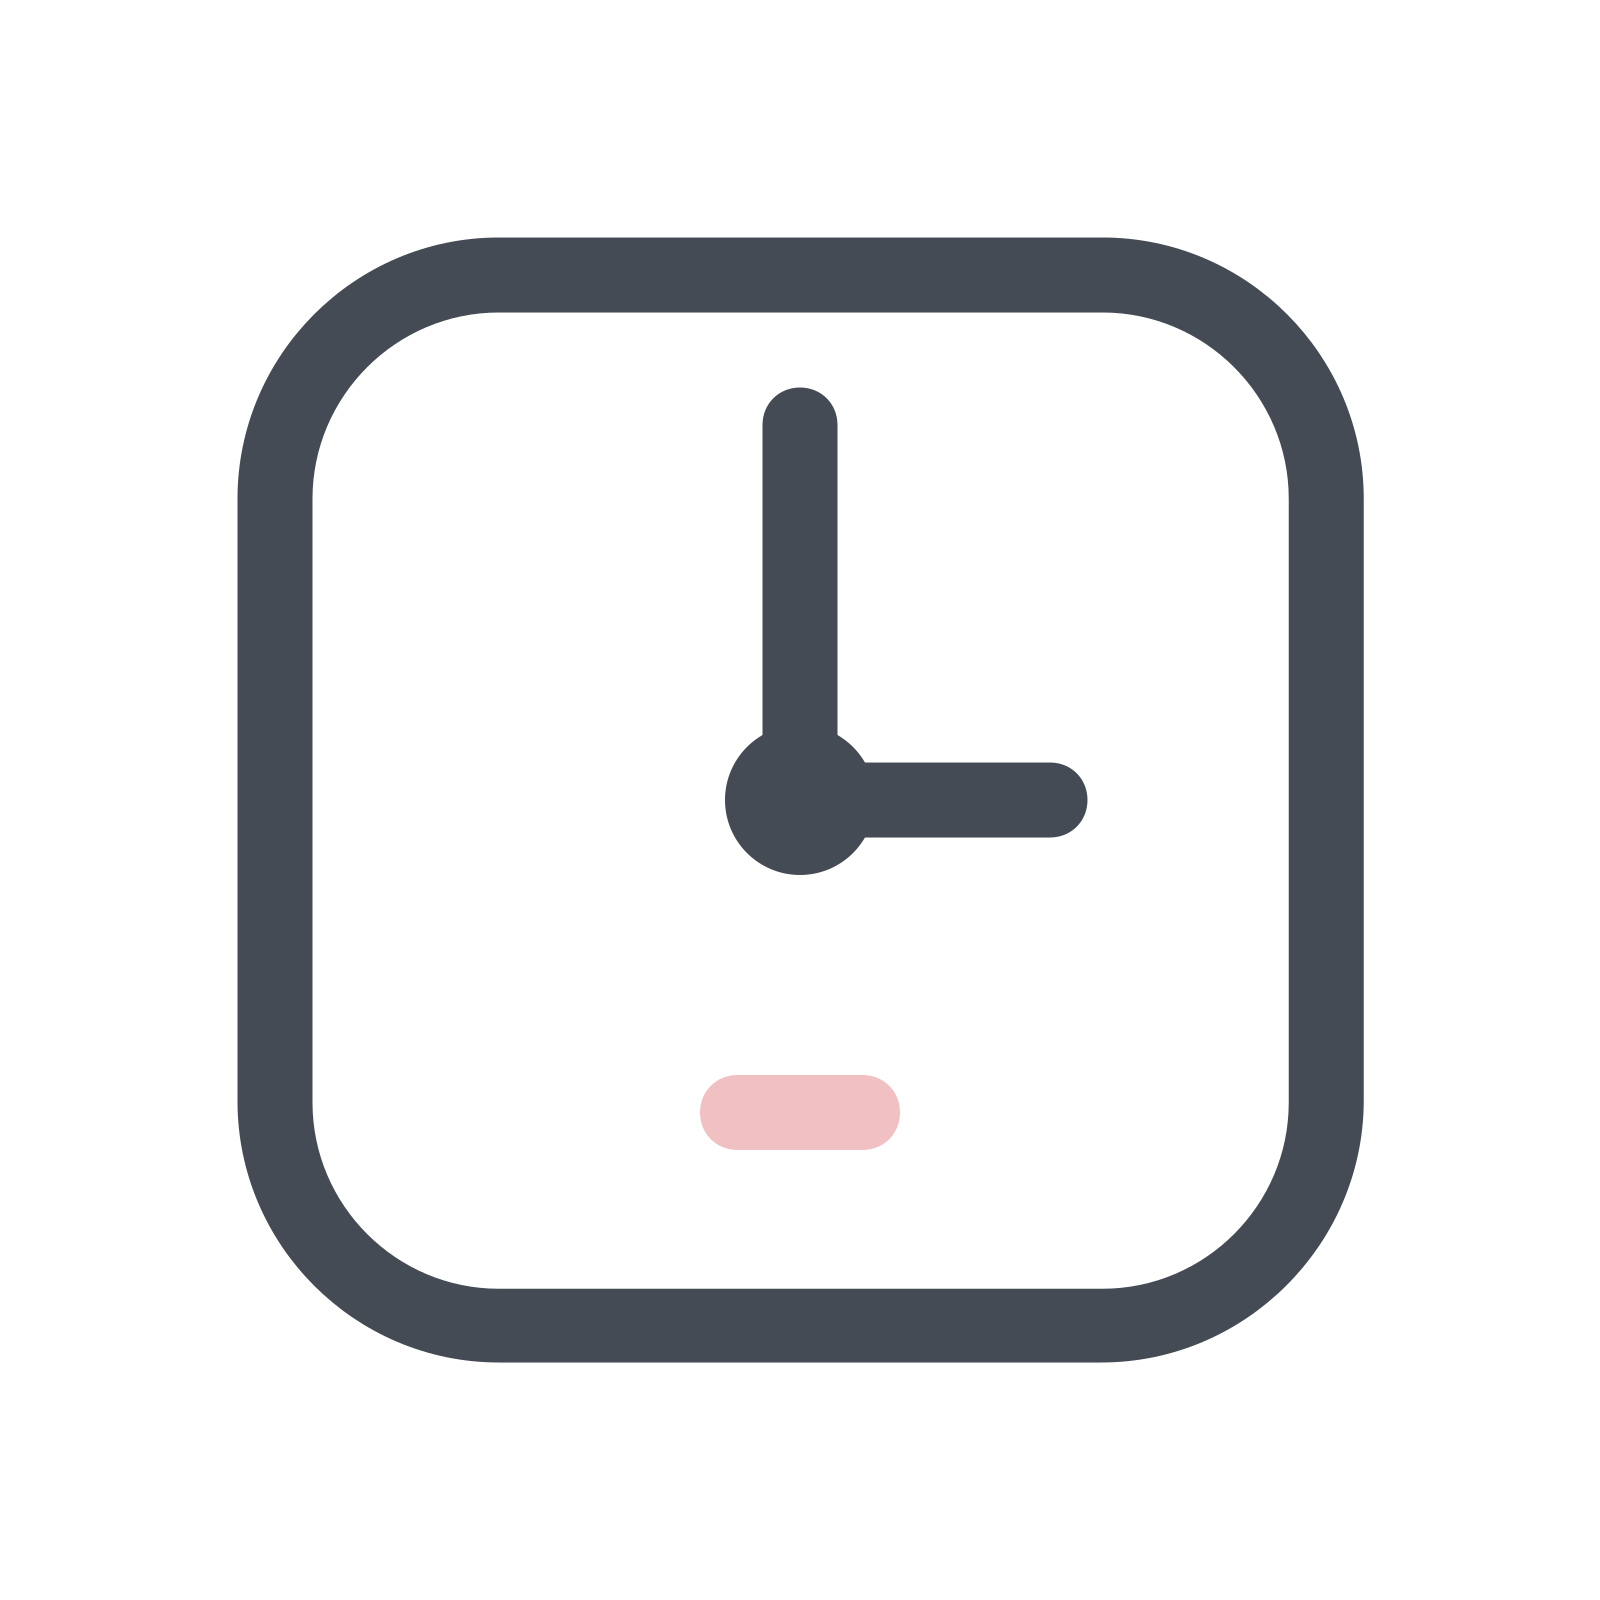 Square Clock Icon - free download, PNG and vector